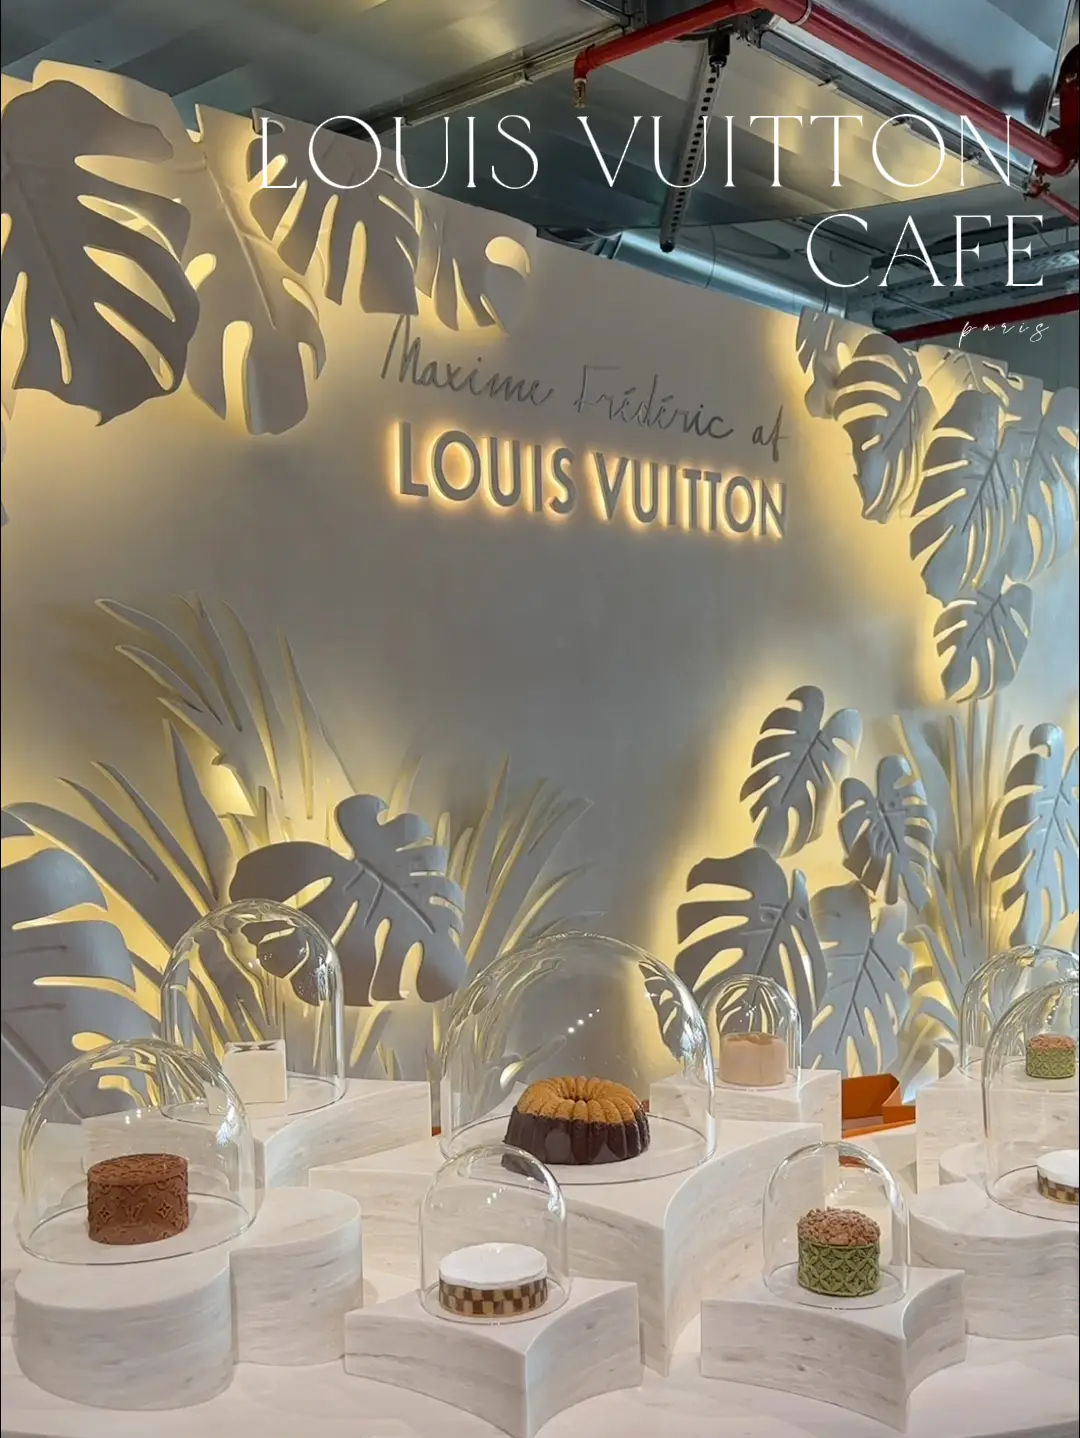 Louis Vuitton on X: A warm welcome. A peak inside the interior of